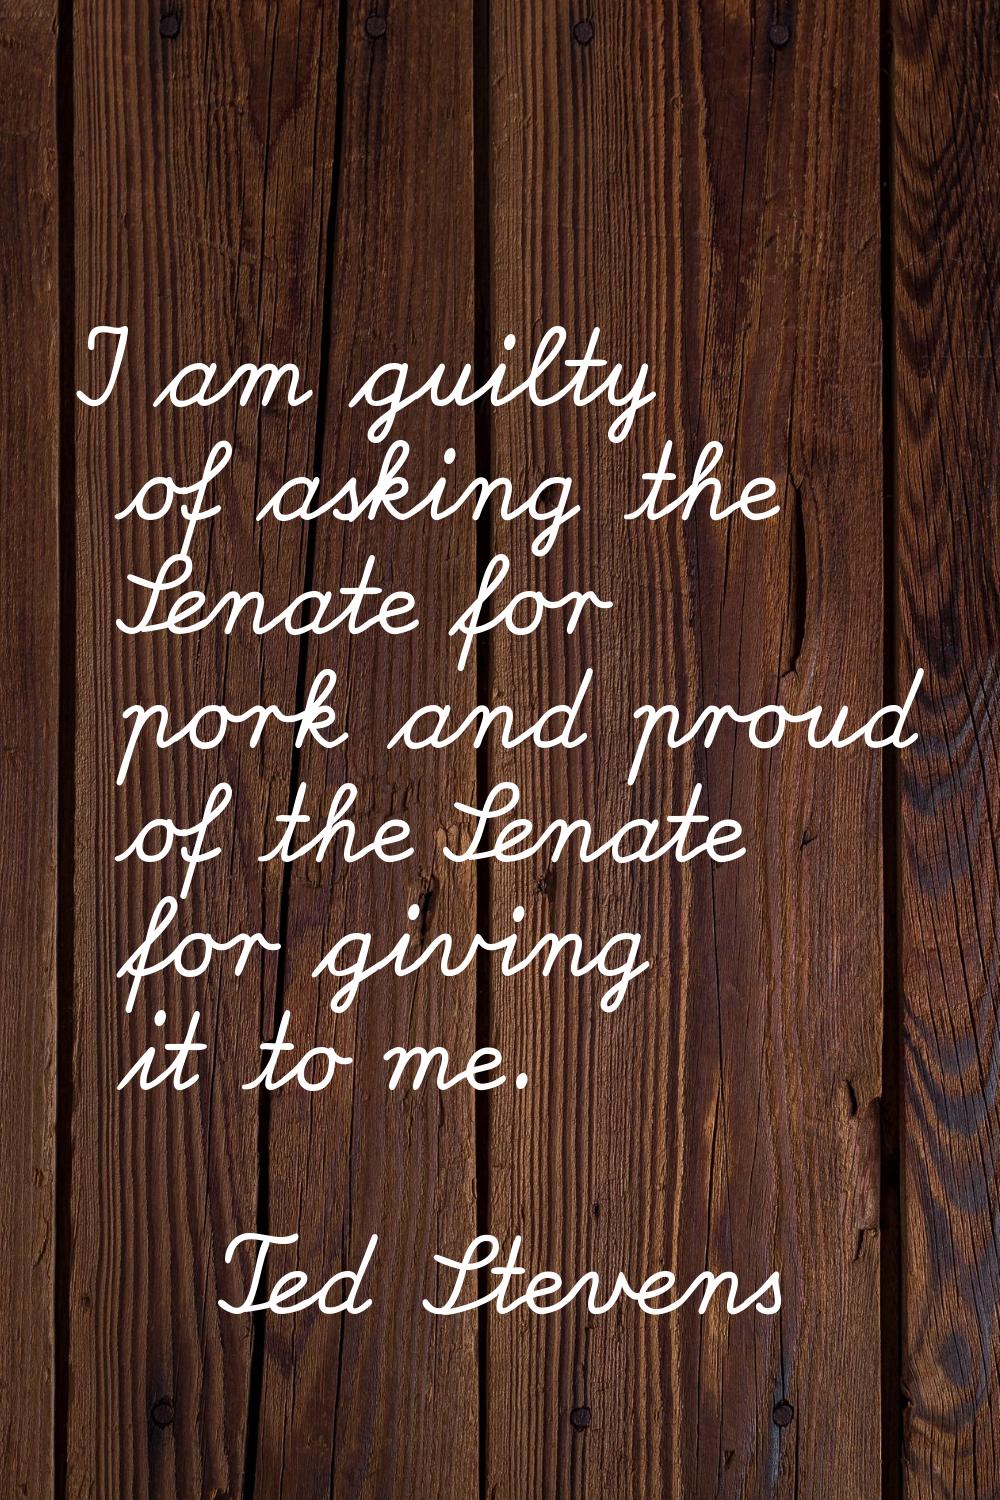 I am guilty of asking the Senate for pork and proud of the Senate for giving it to me.